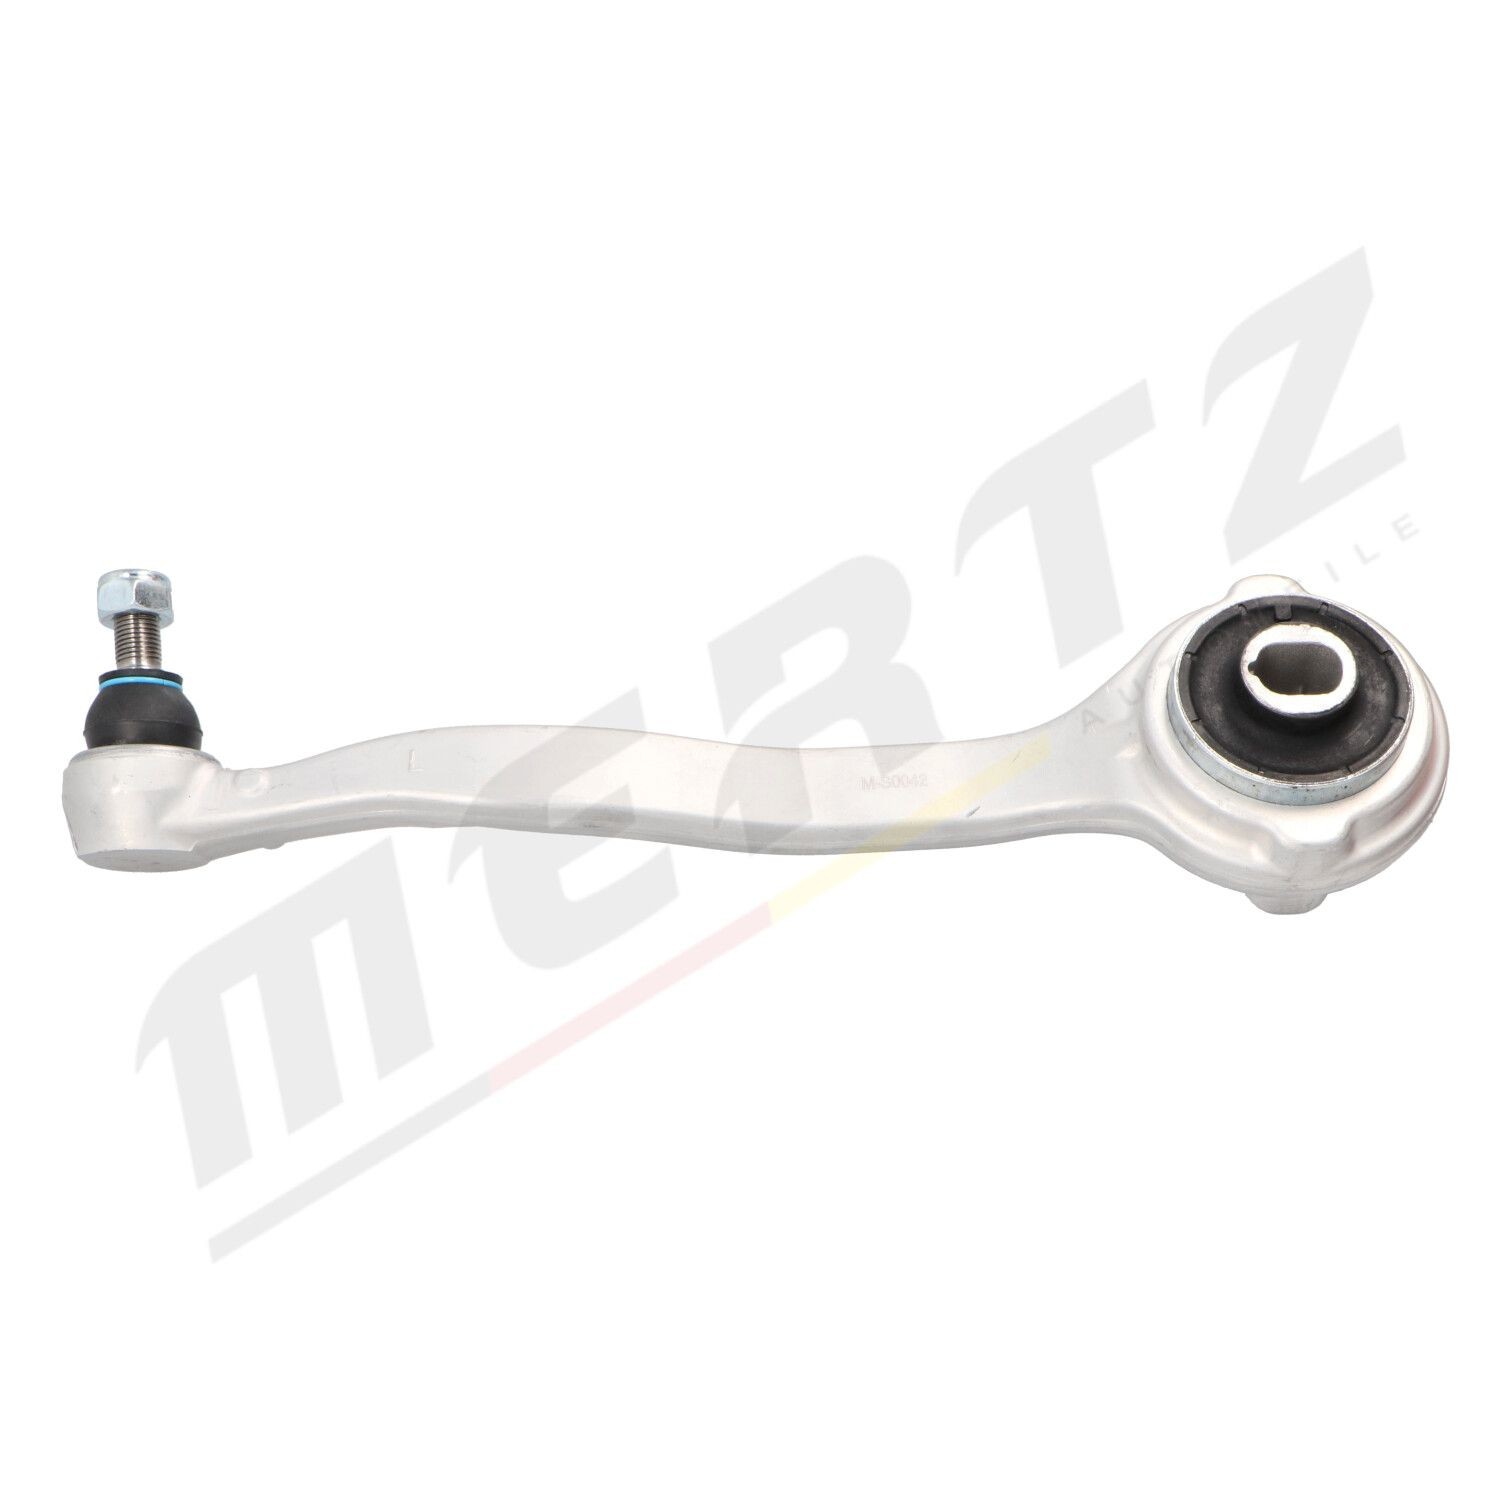 MERTZ Control arms rear and front Mercedes C Class W203 new M-S0042